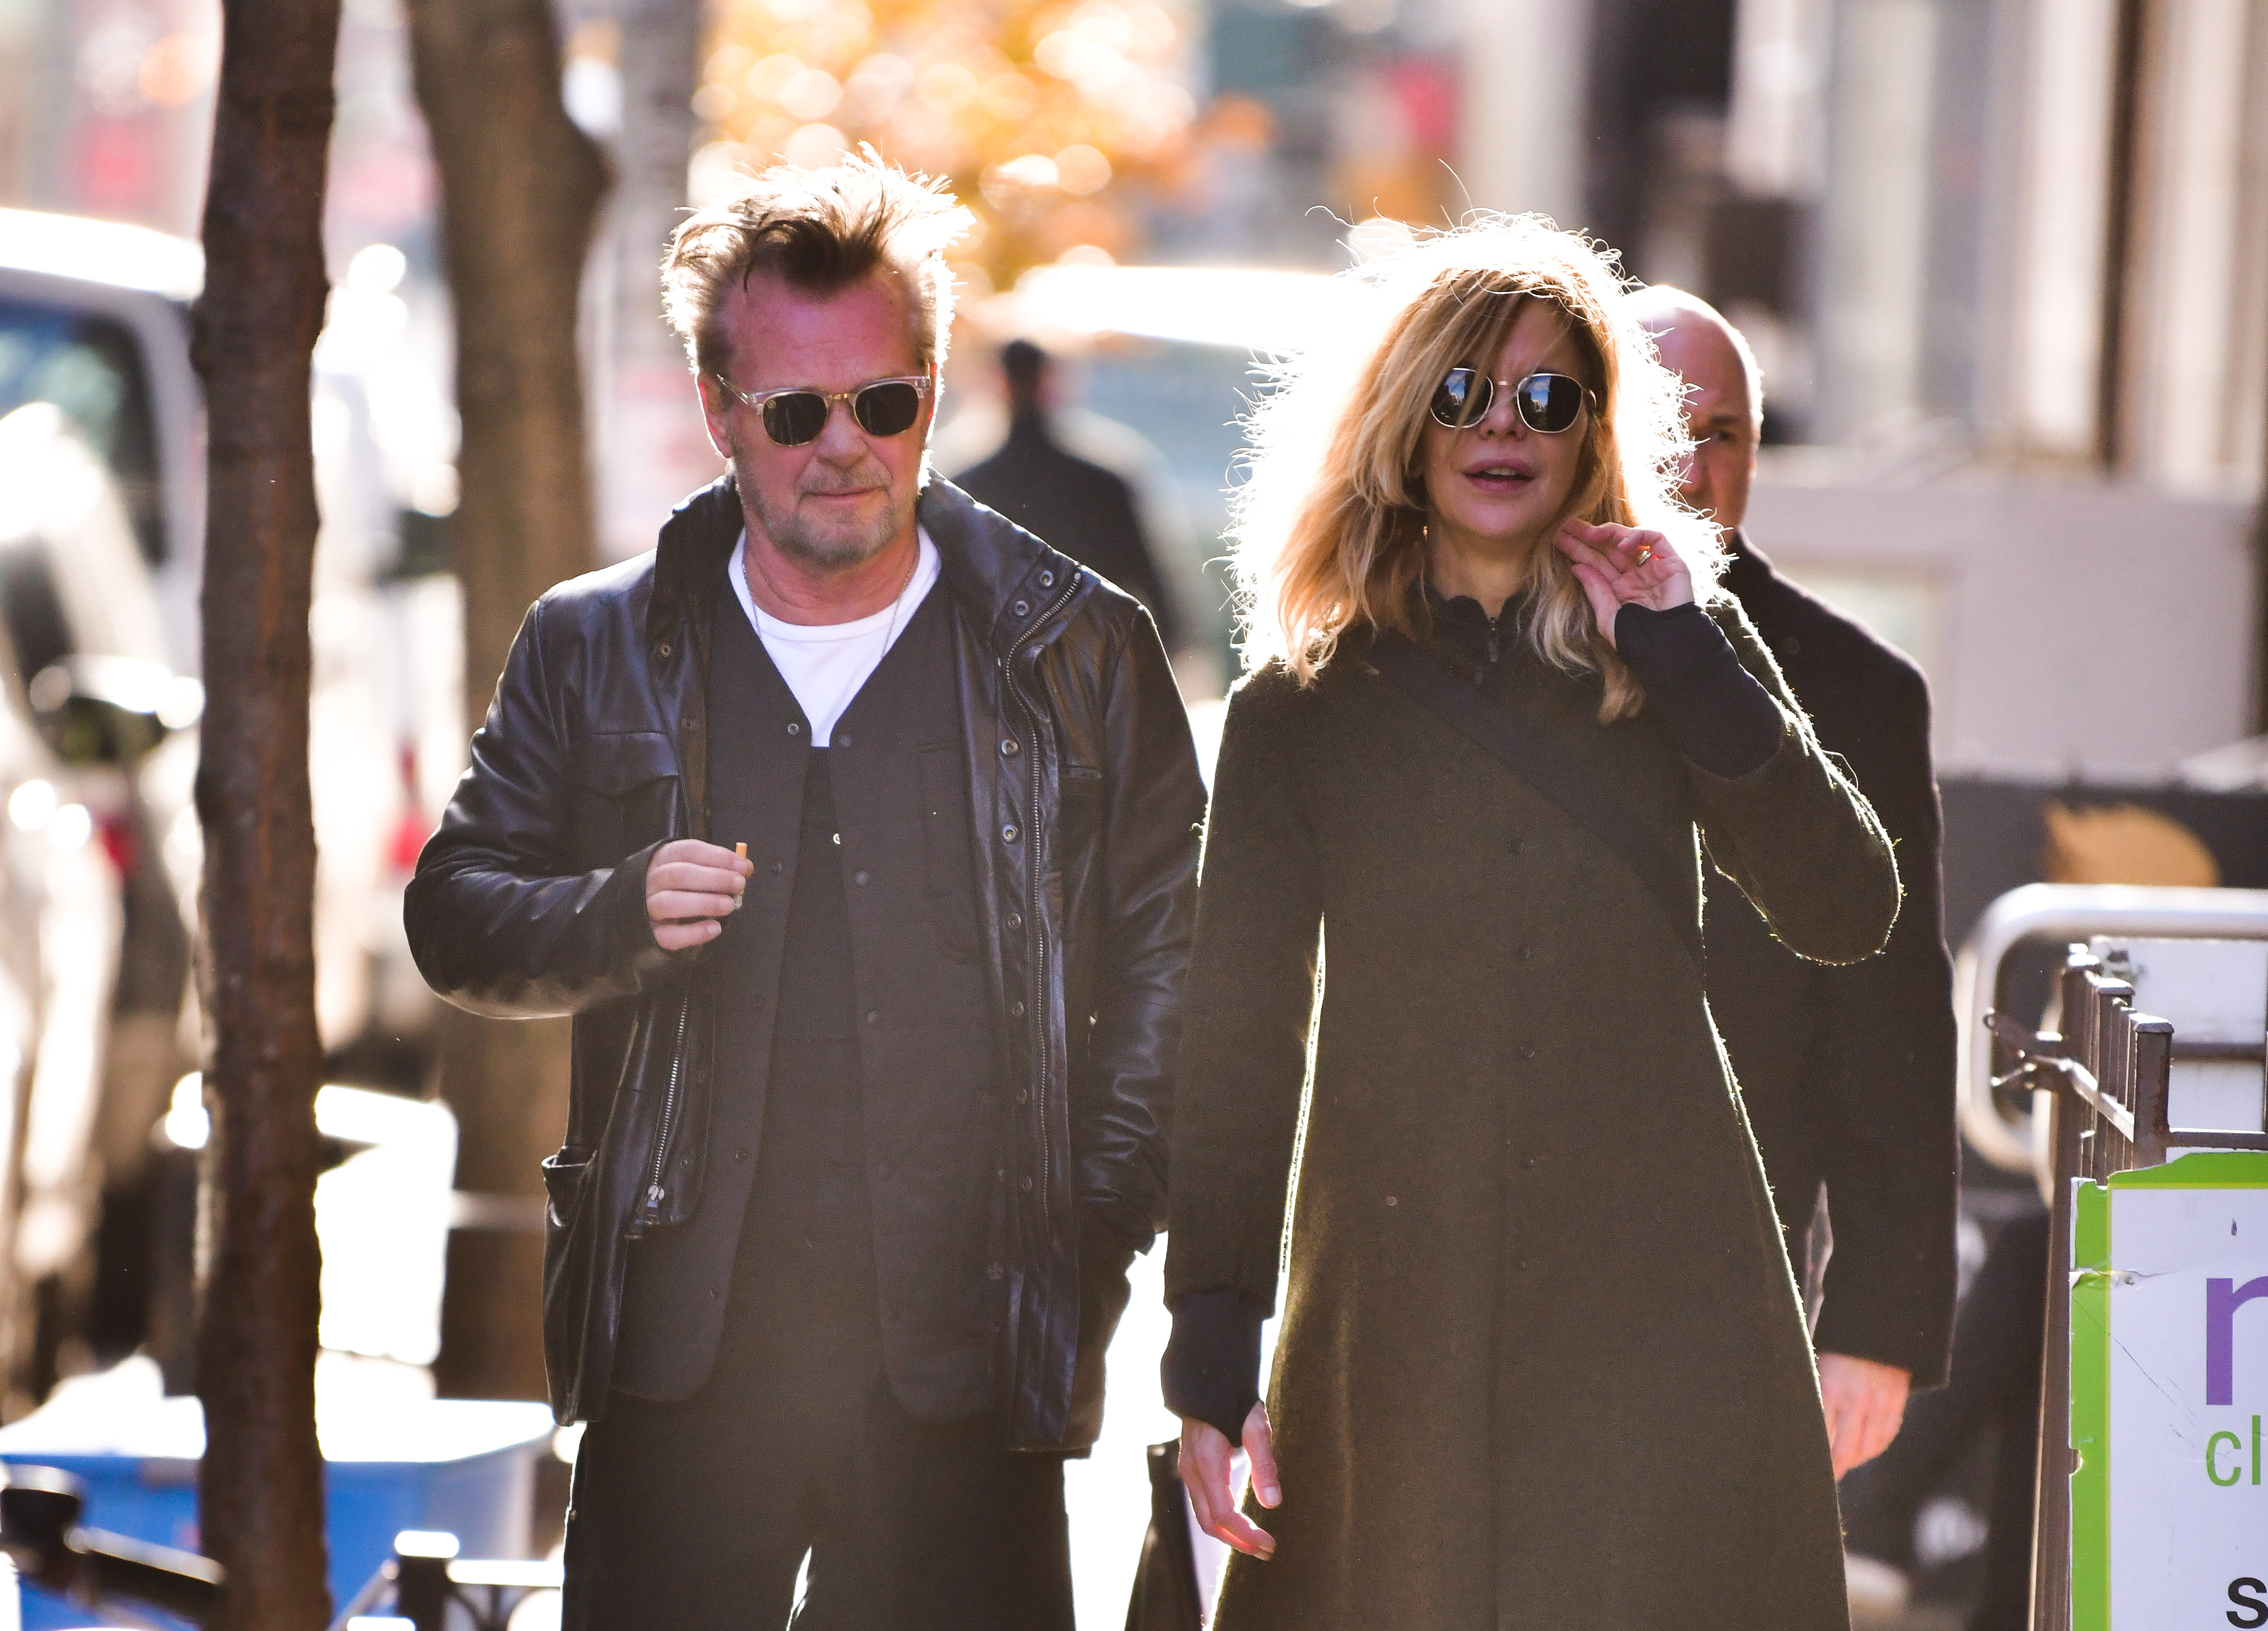 John Mellencamp and Meg Ryan seen on the streets of Manhattan, New York City, on December 3, 2018 | Source: Getty Images